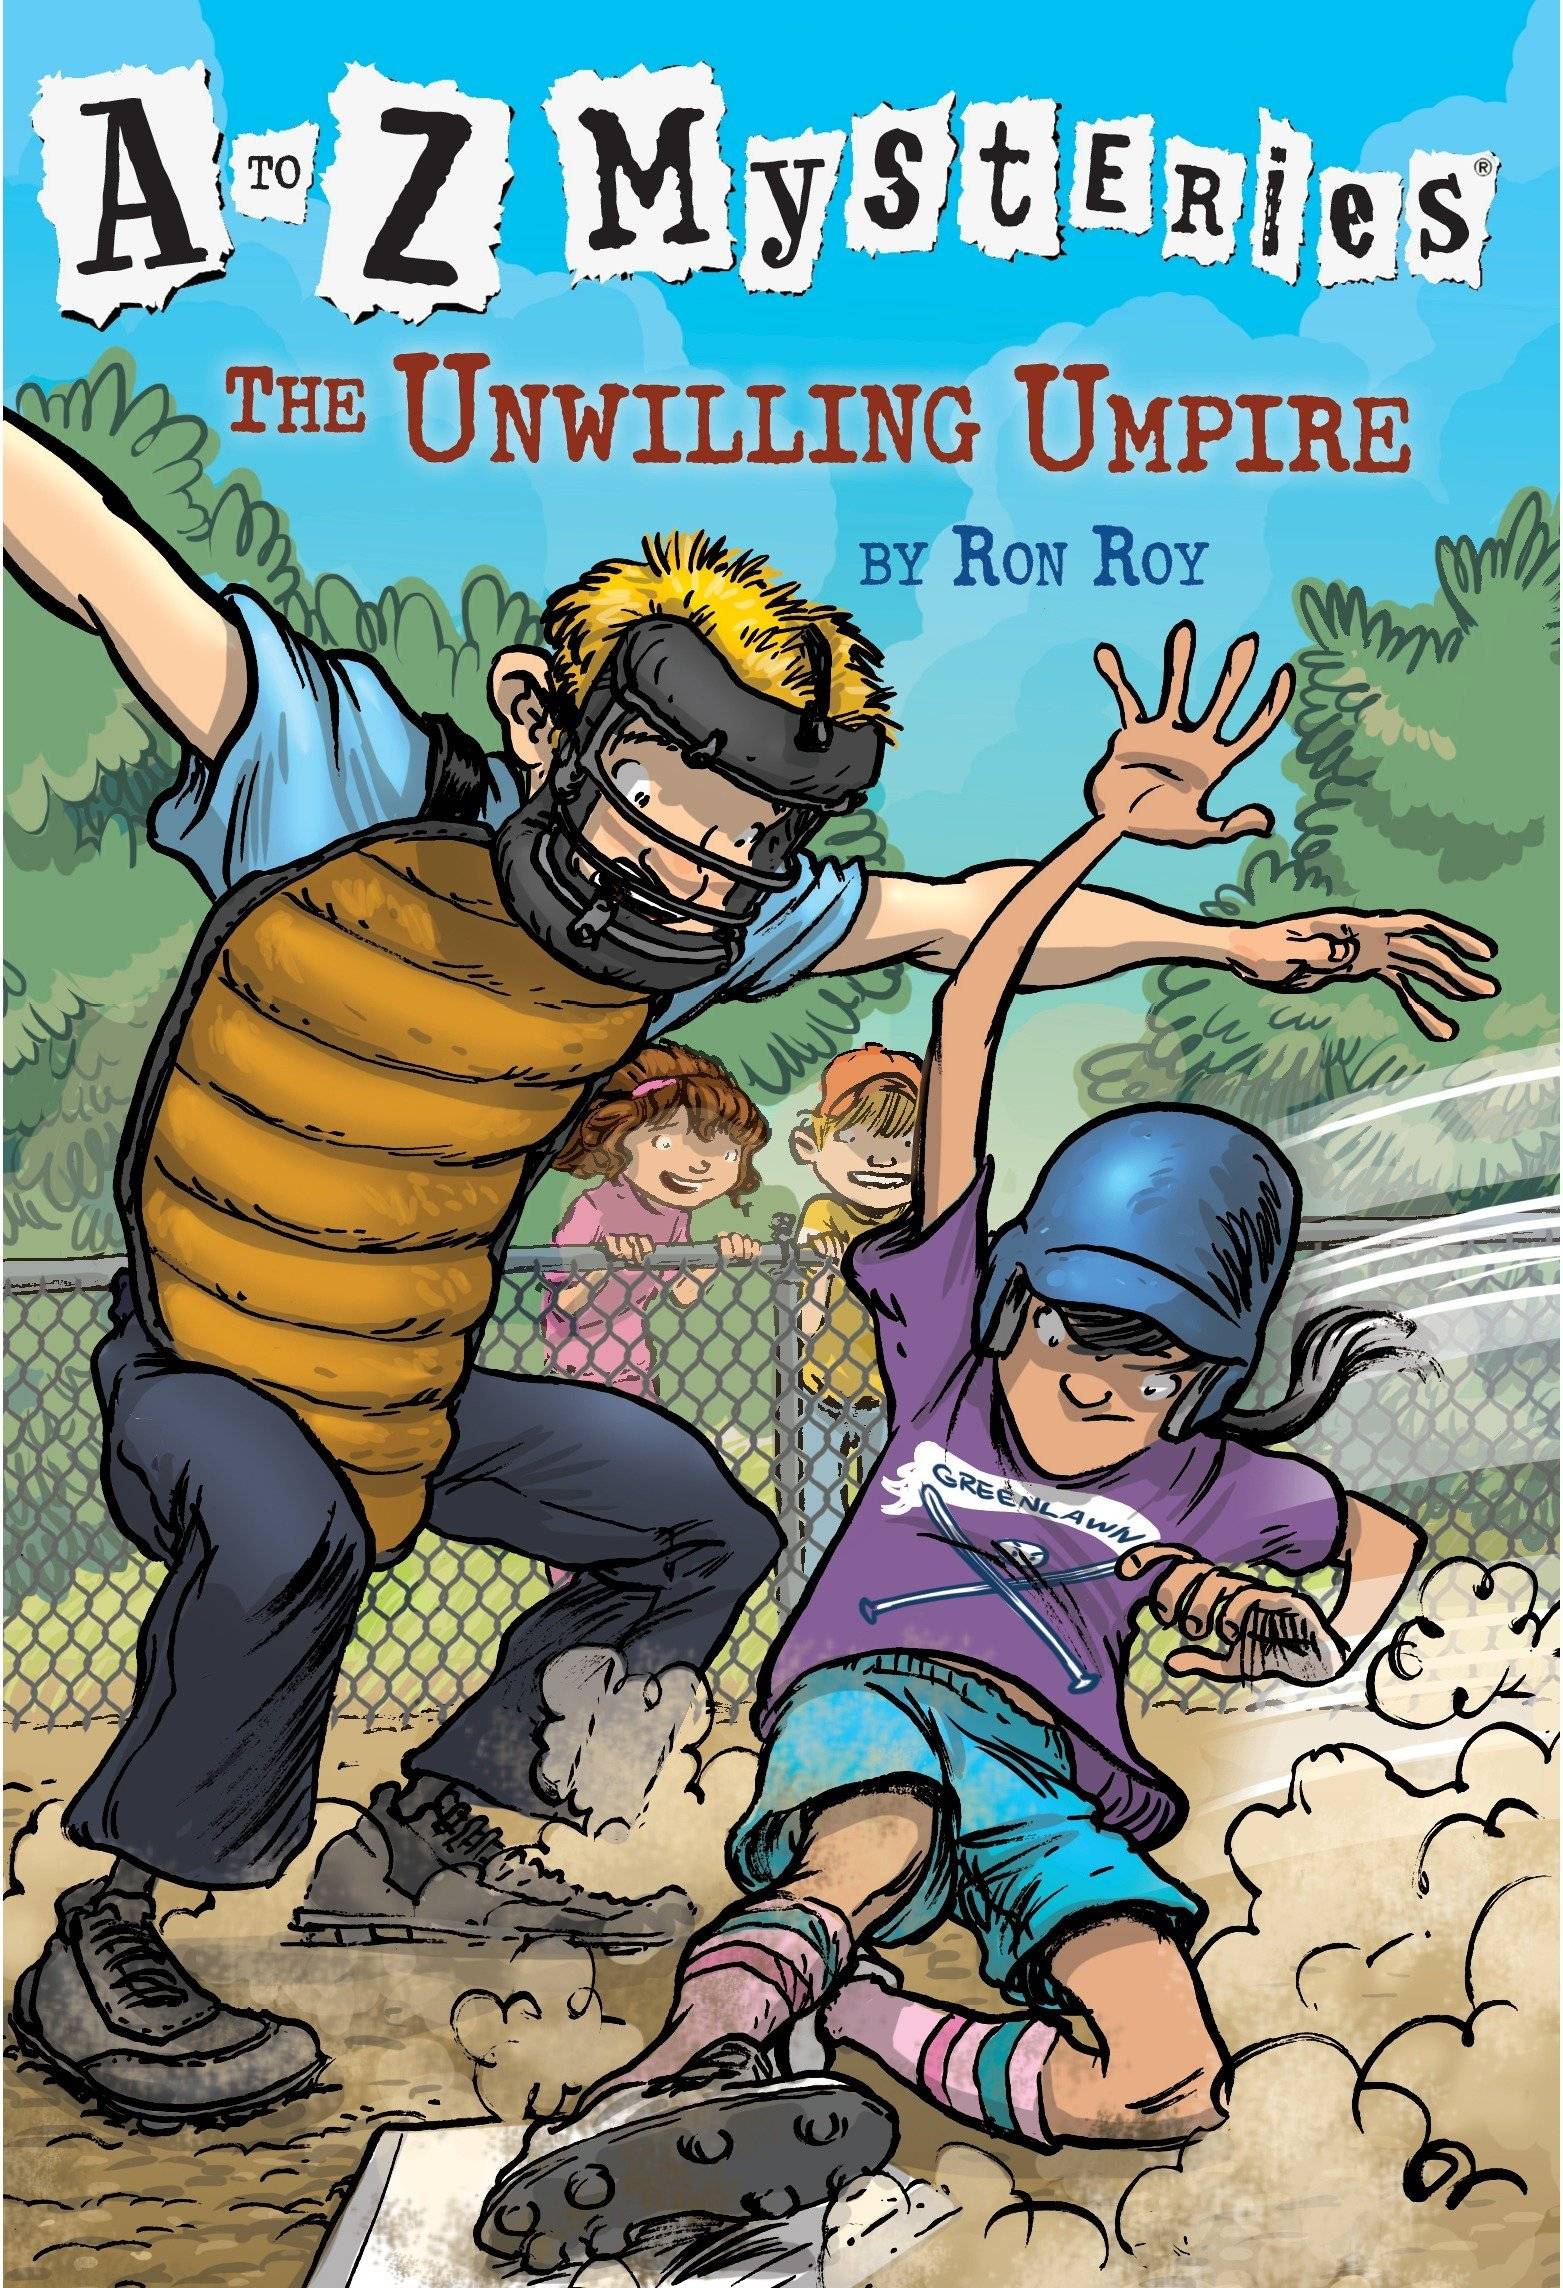 IMG : A to Z mysteries-The unwilling umpire